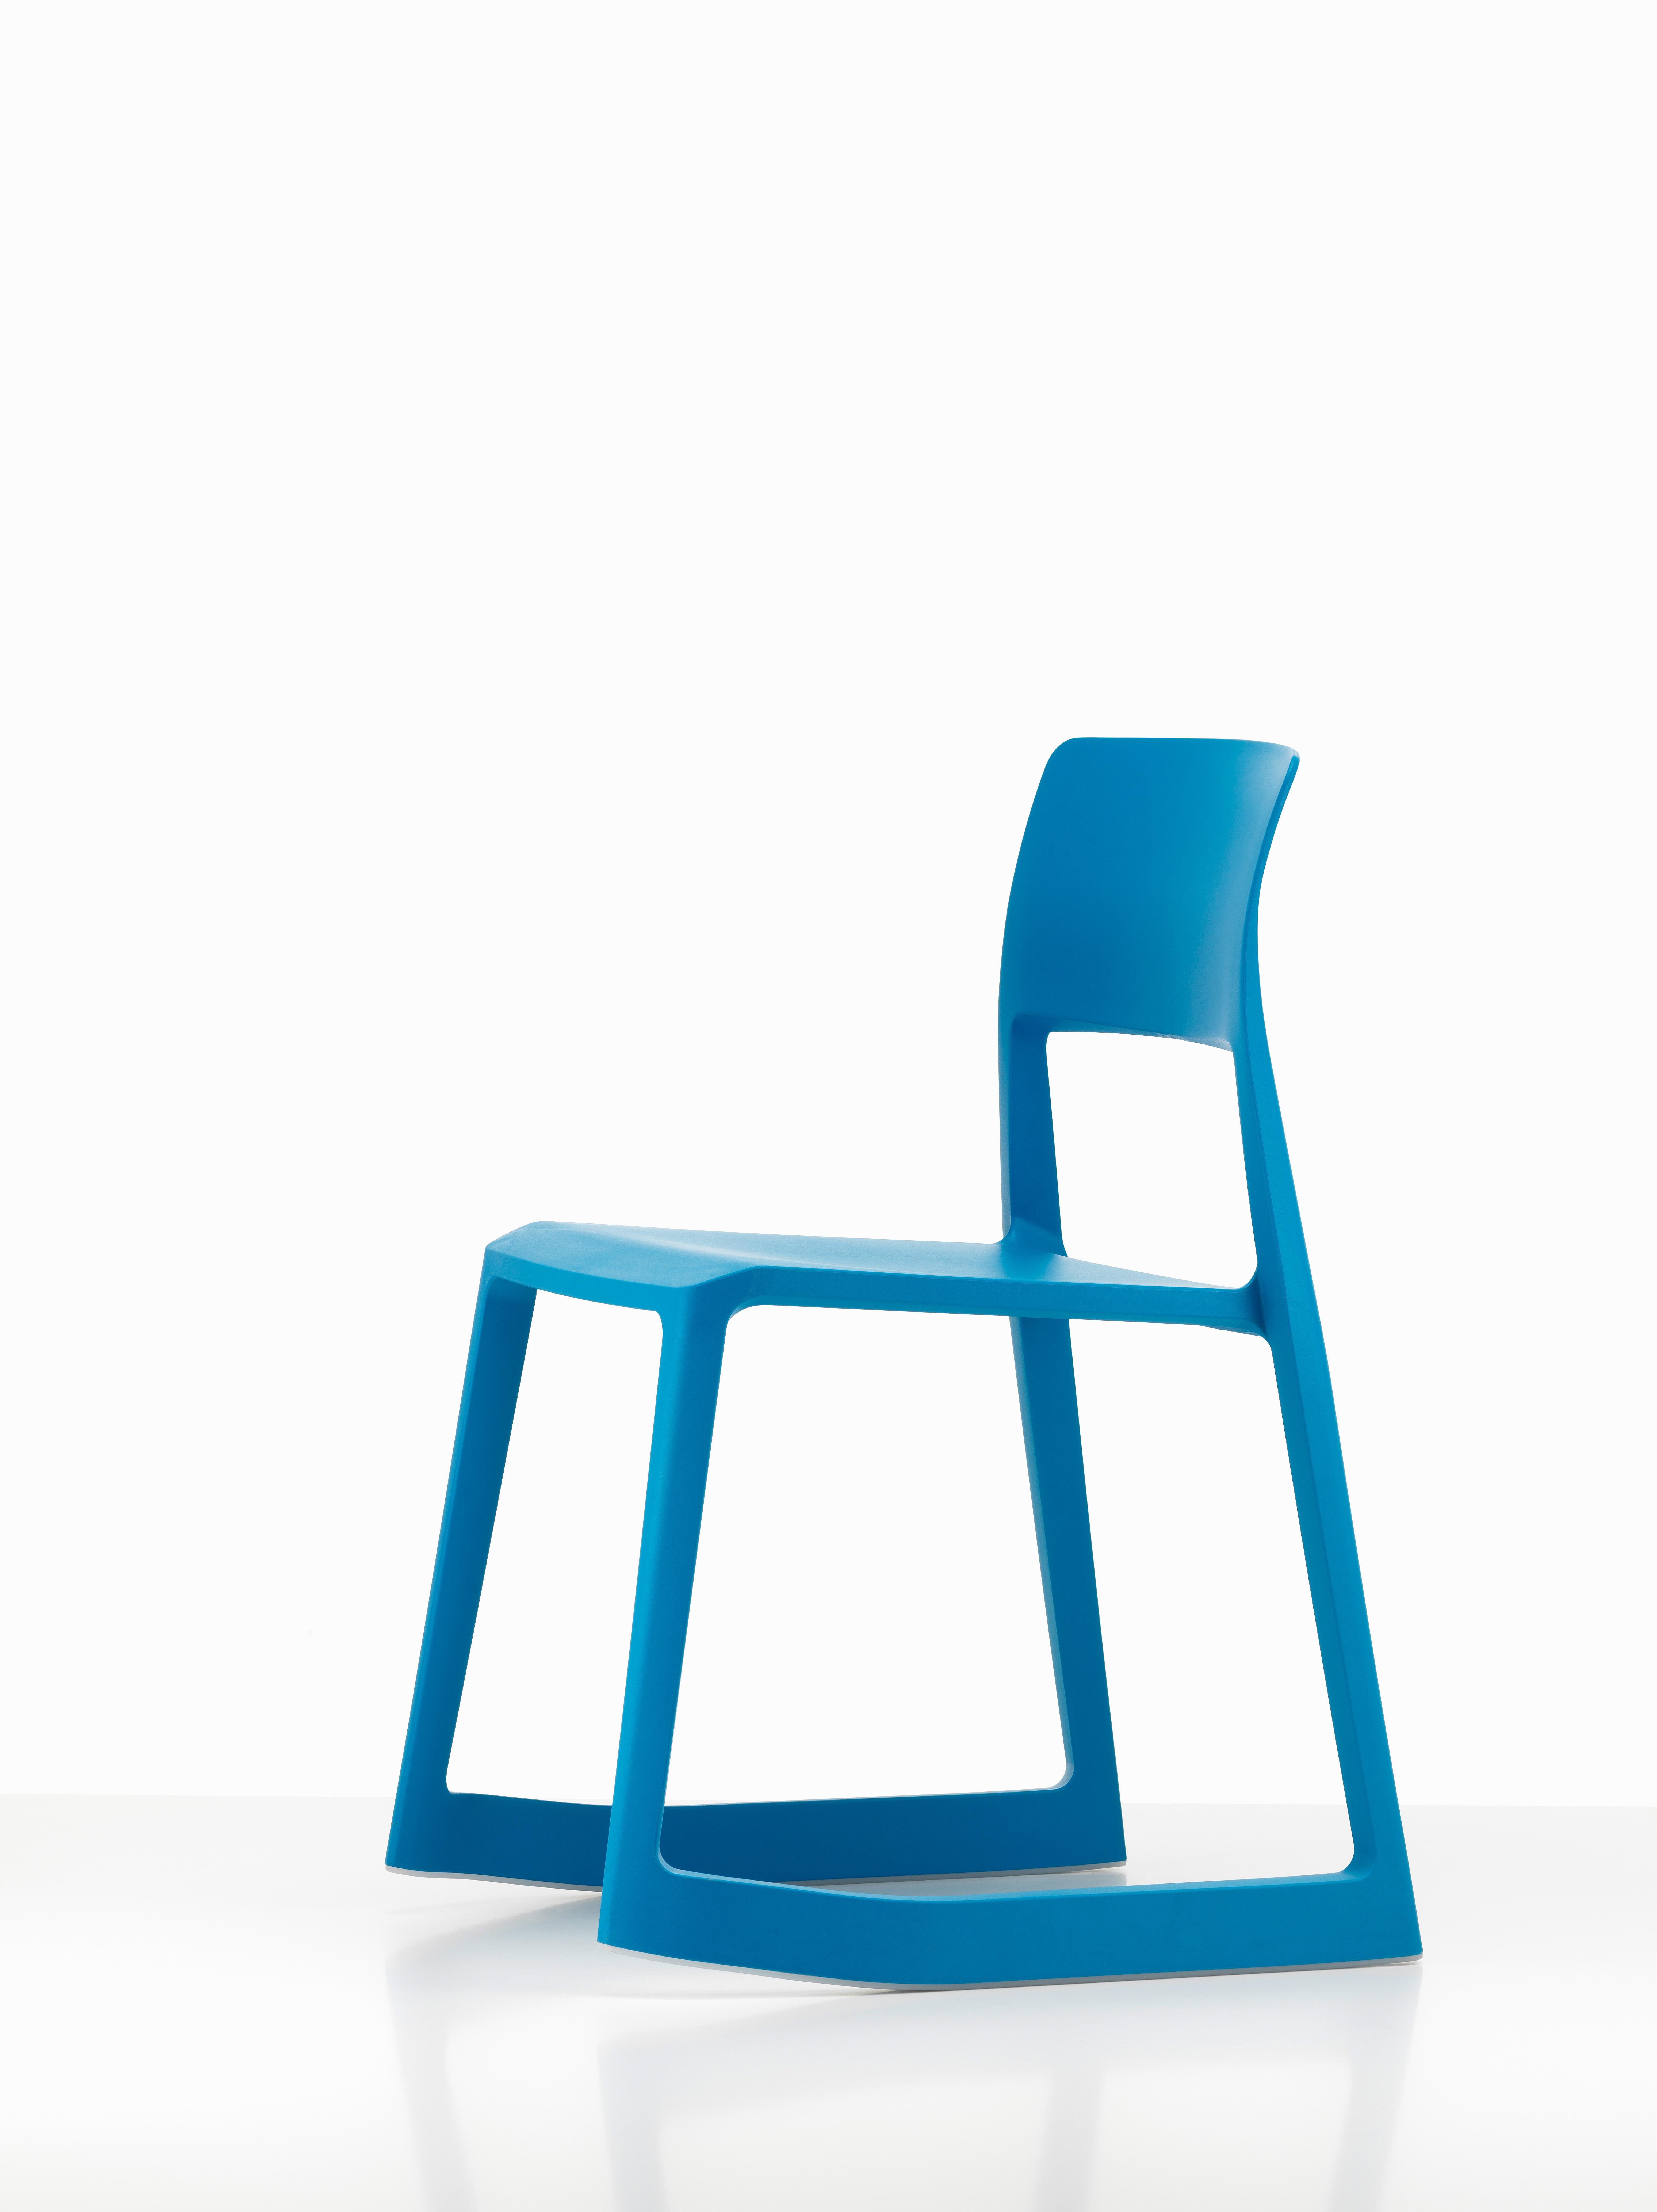 Tip Ton defines a whole new chair typology: the solid plastic chair with forward-tilt action. Its name refers to the characteristic dual sitting postures – from a normal position, Tip Ton can be tilted forward a few degrees where the chair then